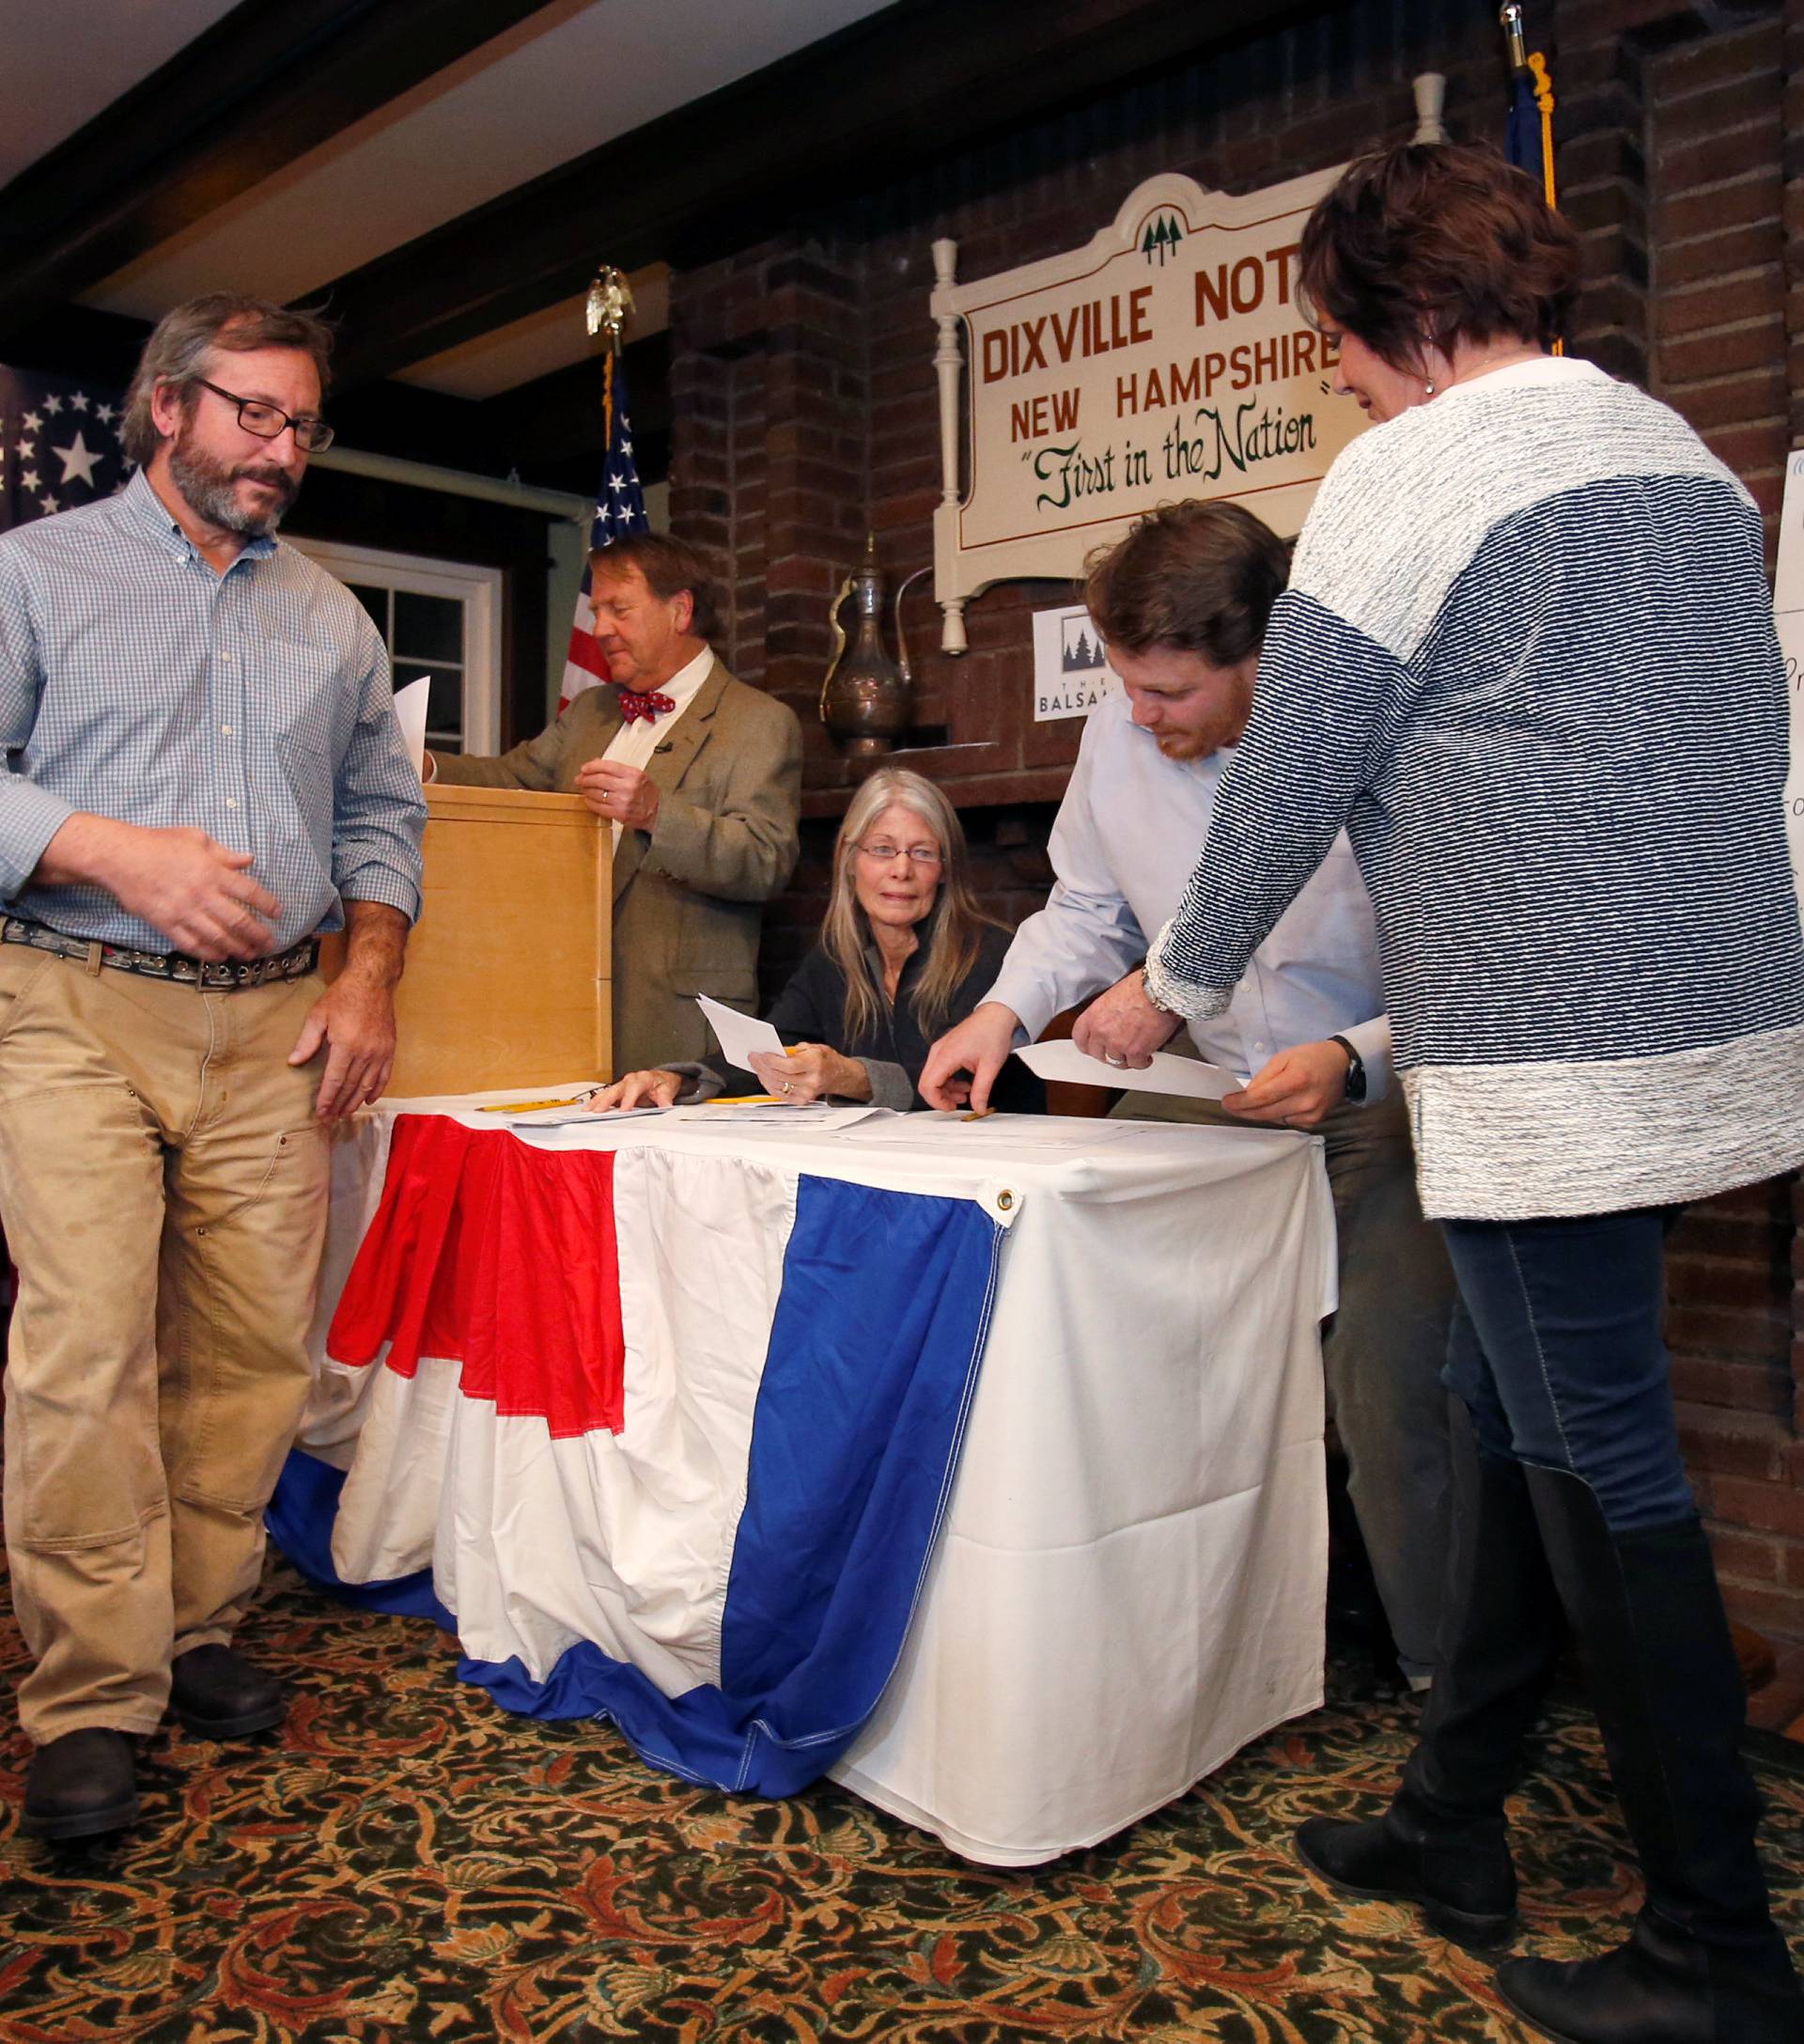 Nancy DePalma hands in her same day voter registration to Clay Smith as Russ Van Deursen becomes one of the first U.S. voters to cast a ballot in the U.S. presidential election at midnight in tiny Dixville Notch